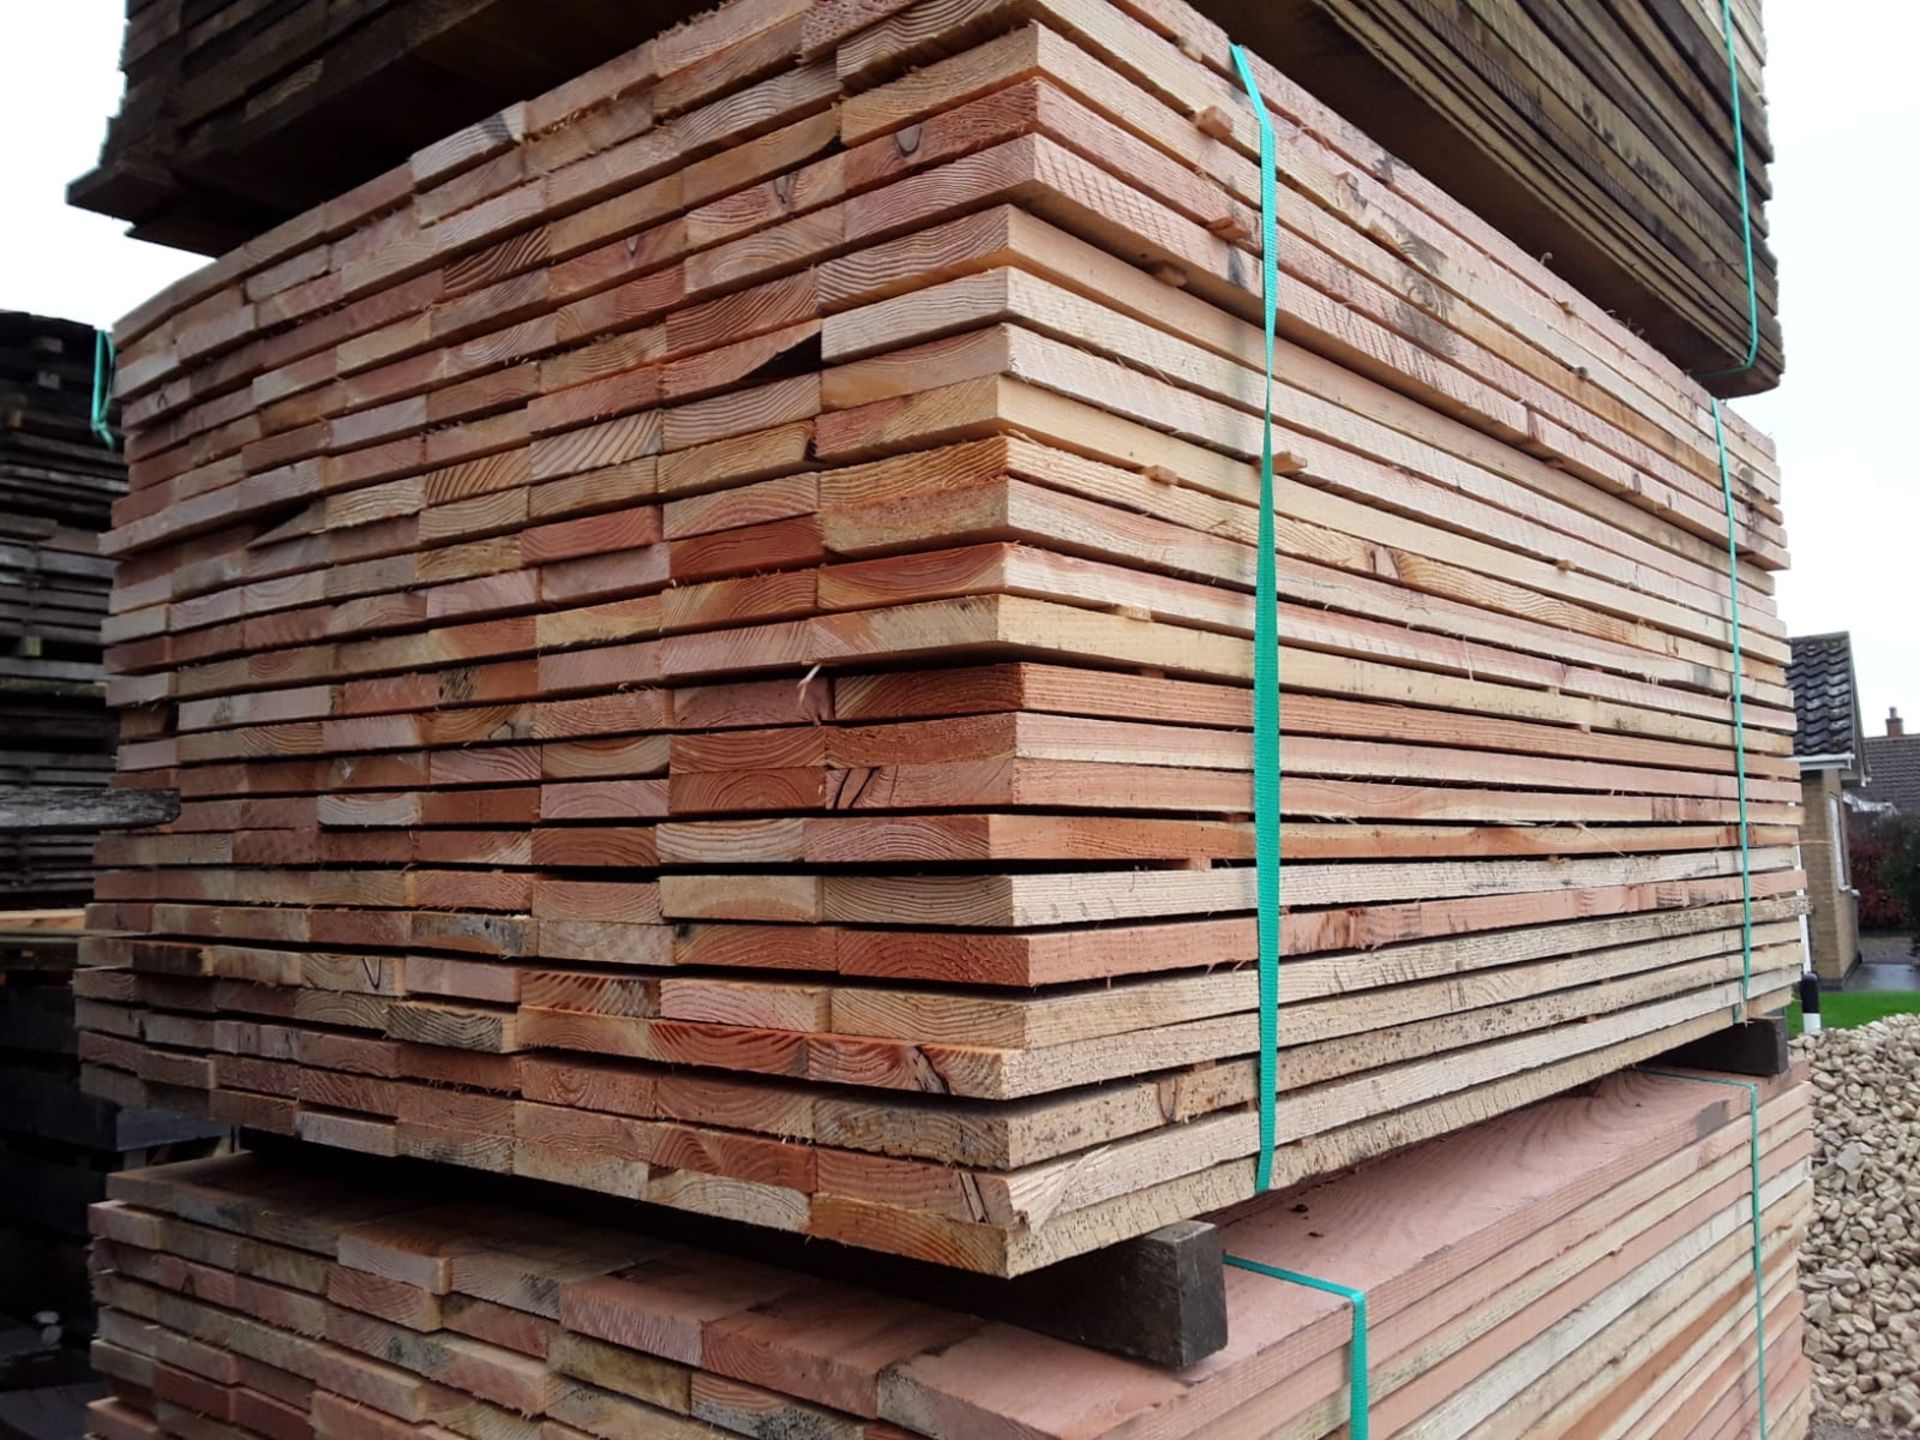 100x Softwood Unseasoned Sawn Mixed Larch / Douglas Fir Boards / Planks / Cladding - Image 3 of 12